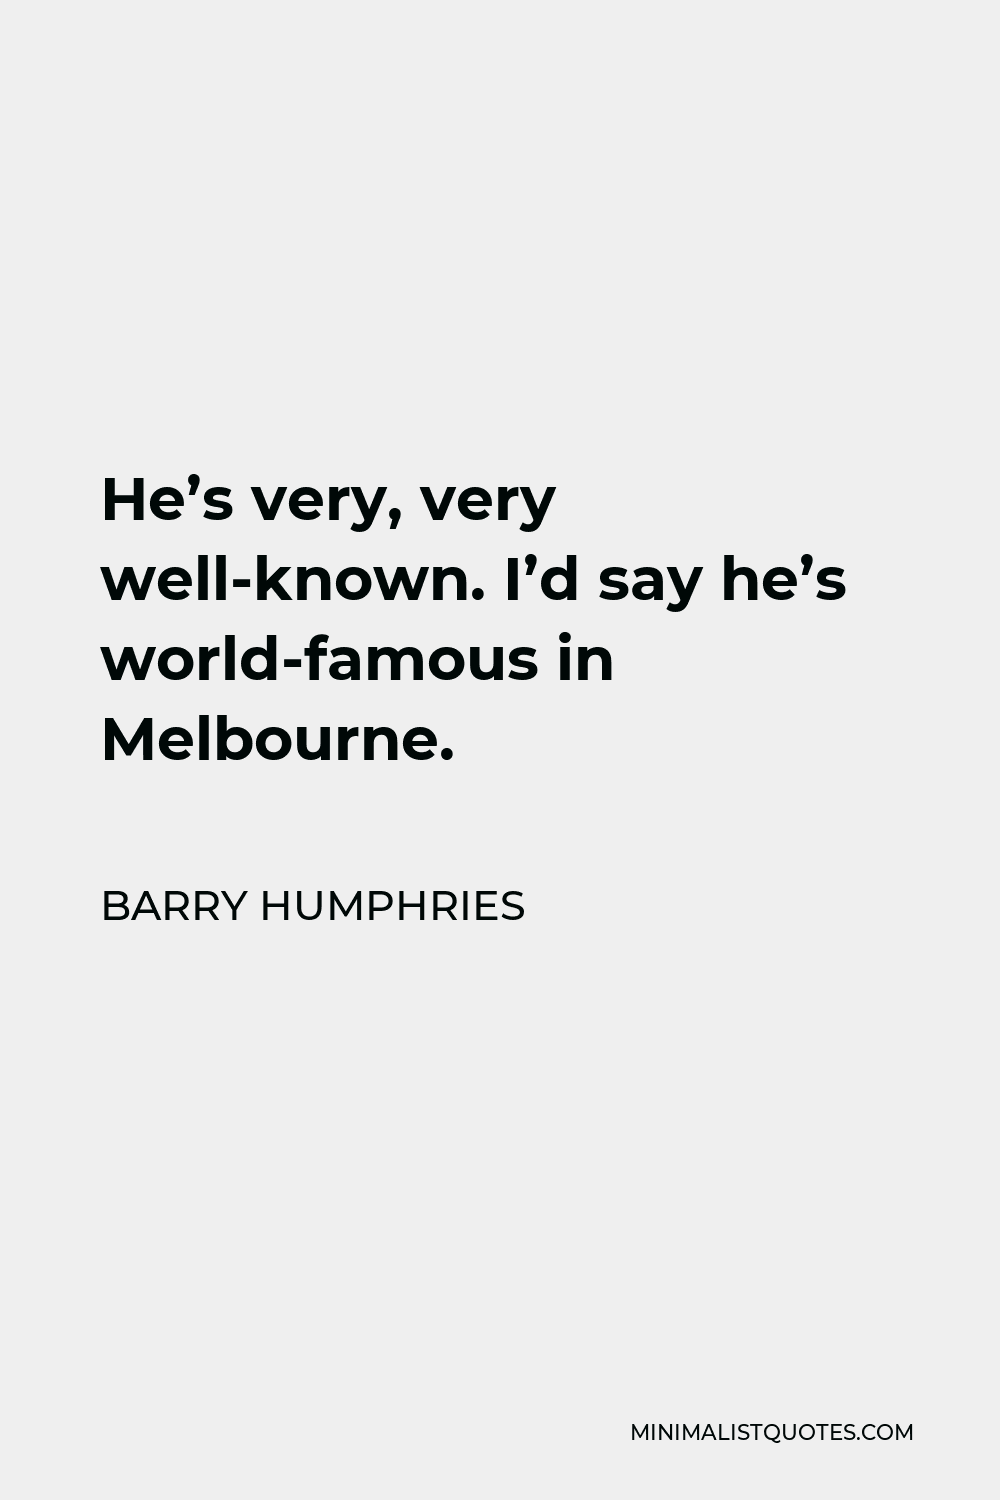 Barry Humphries Quote - He’s very, very well-known. I’d say he’s world-famous in Melbourne.